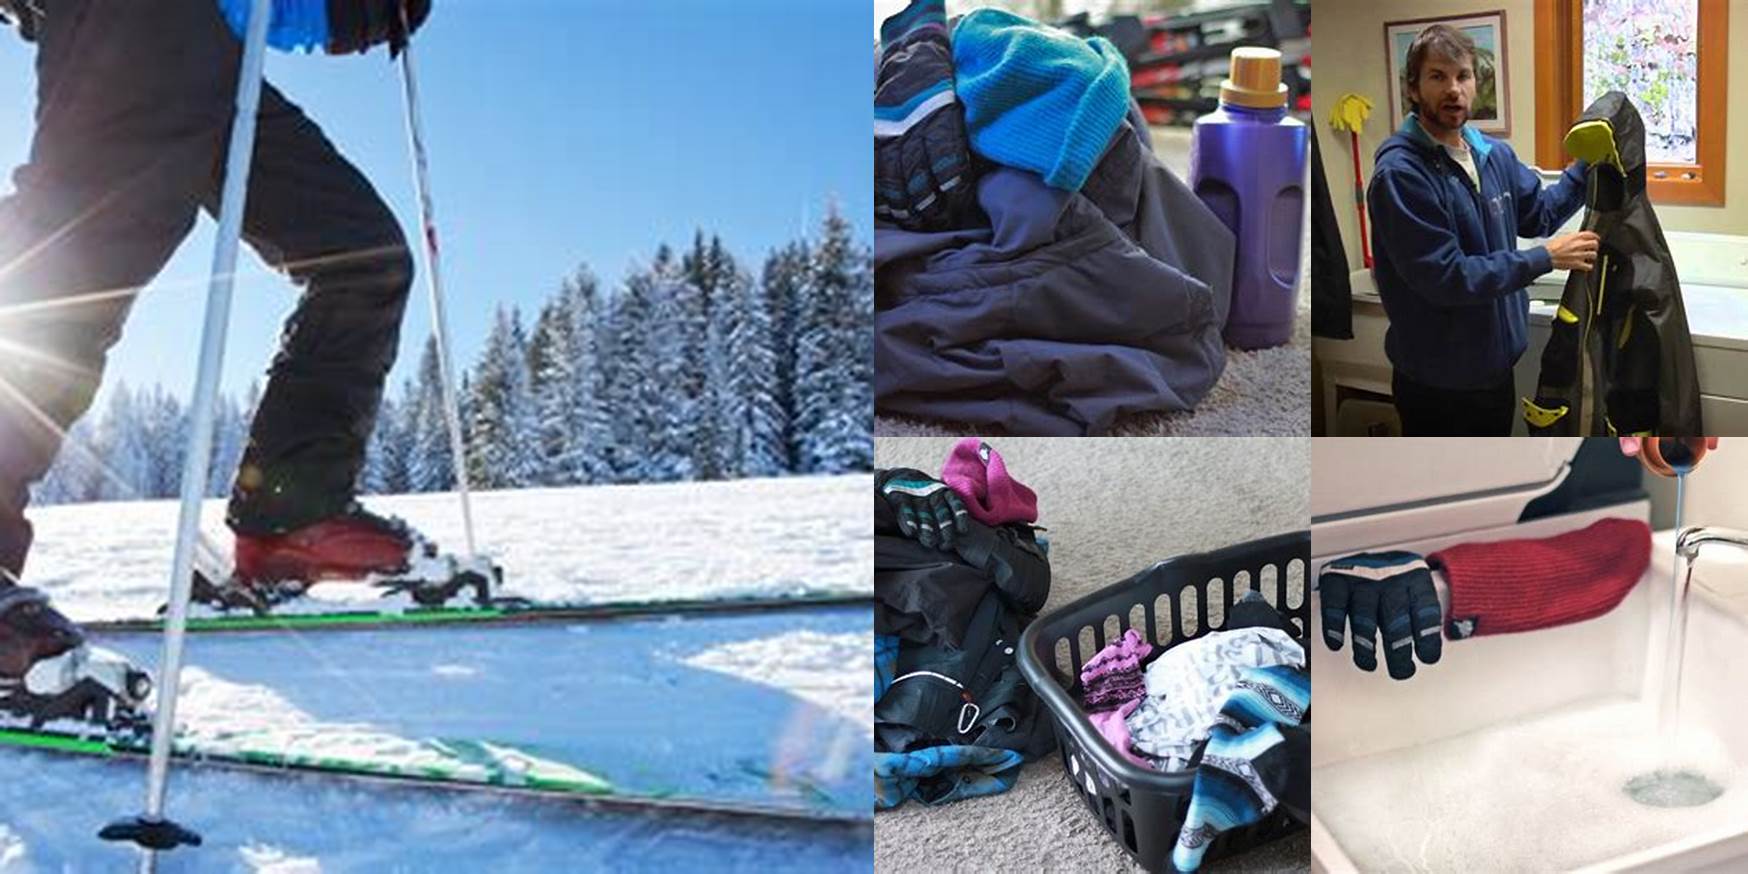 How To Wash Ski Clothes